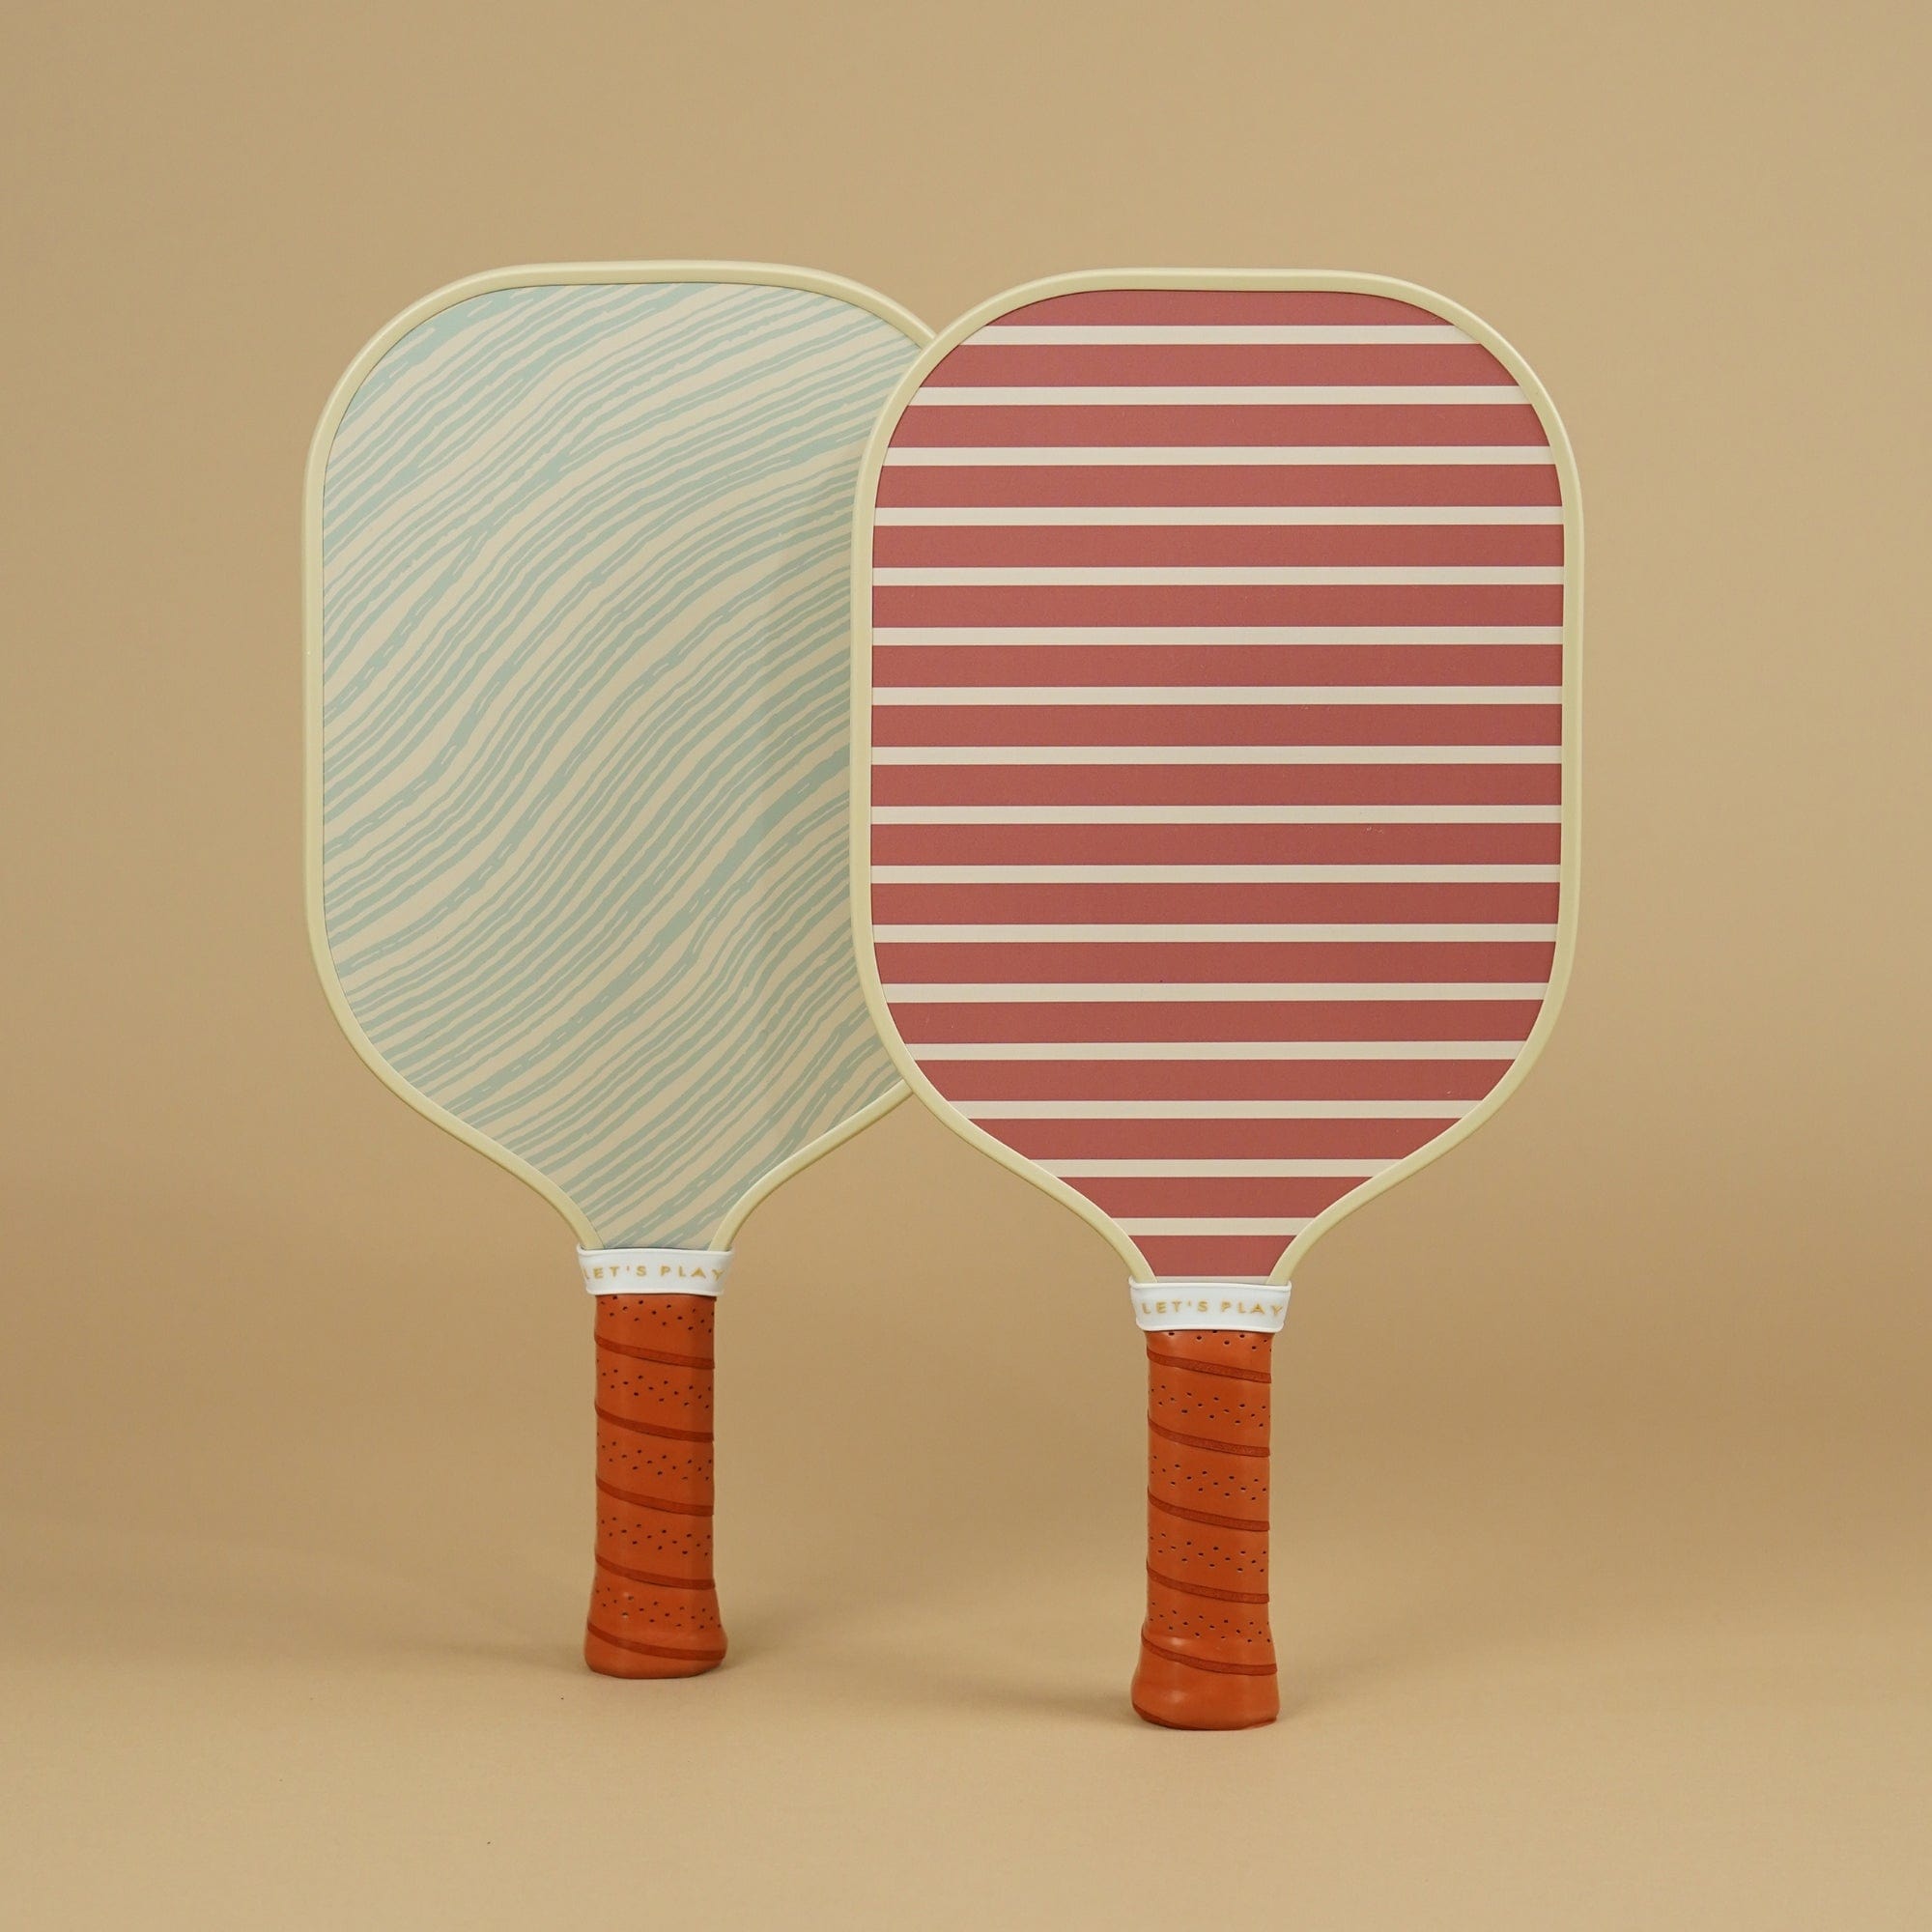 This Retro Pickleball Set Made Me Feel Like Queen of the Court